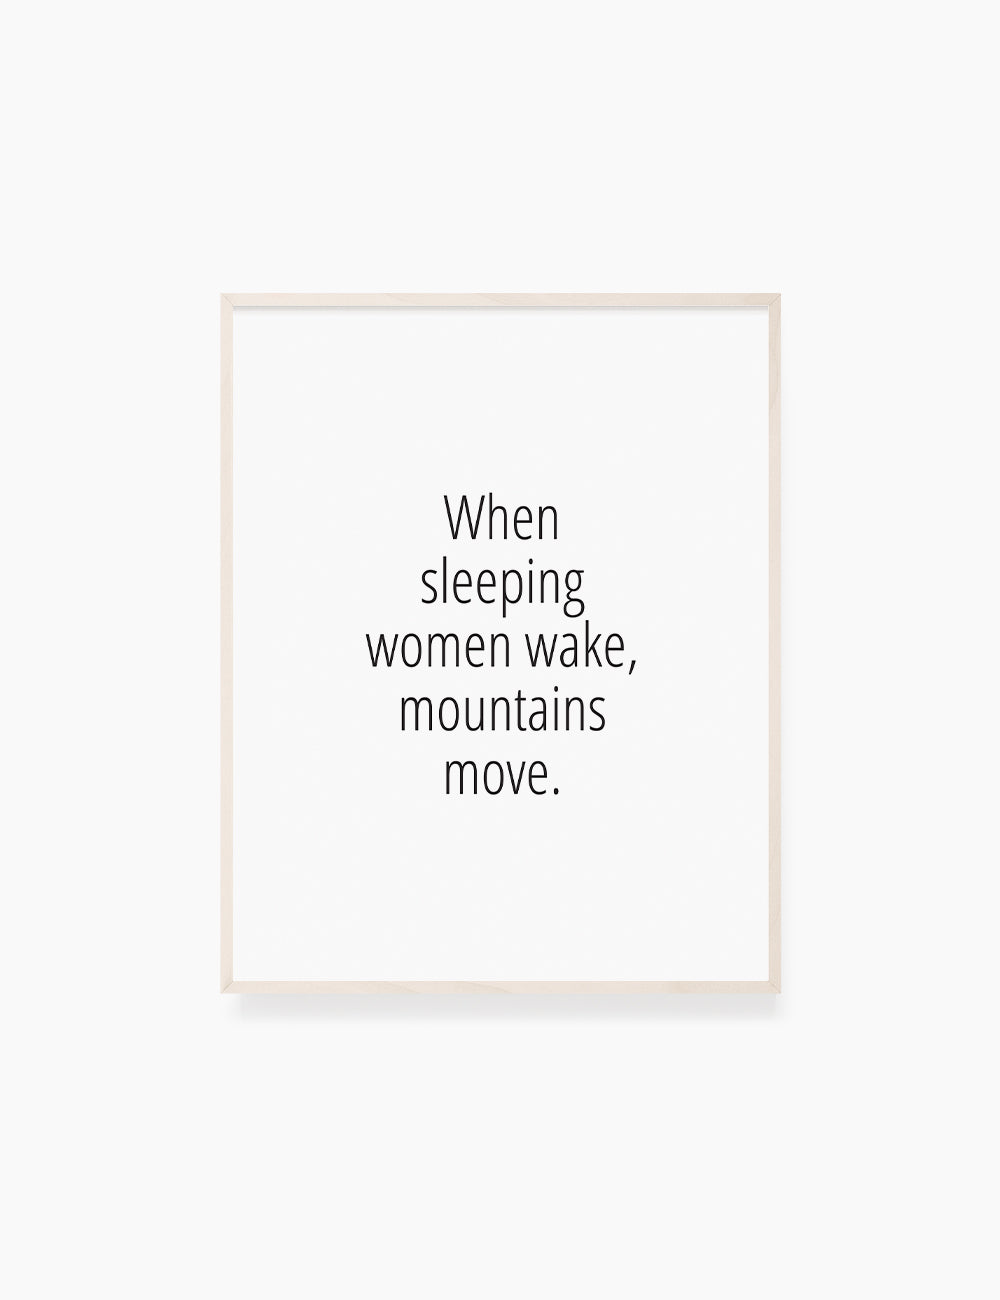 Printable Wall Art Quote: WHEN SLEEPING WOMEN WAKE, MOUNTAINS MOVE. Chinese Proverb. Printable Poster. WA034 - Paper Moon Art & Design